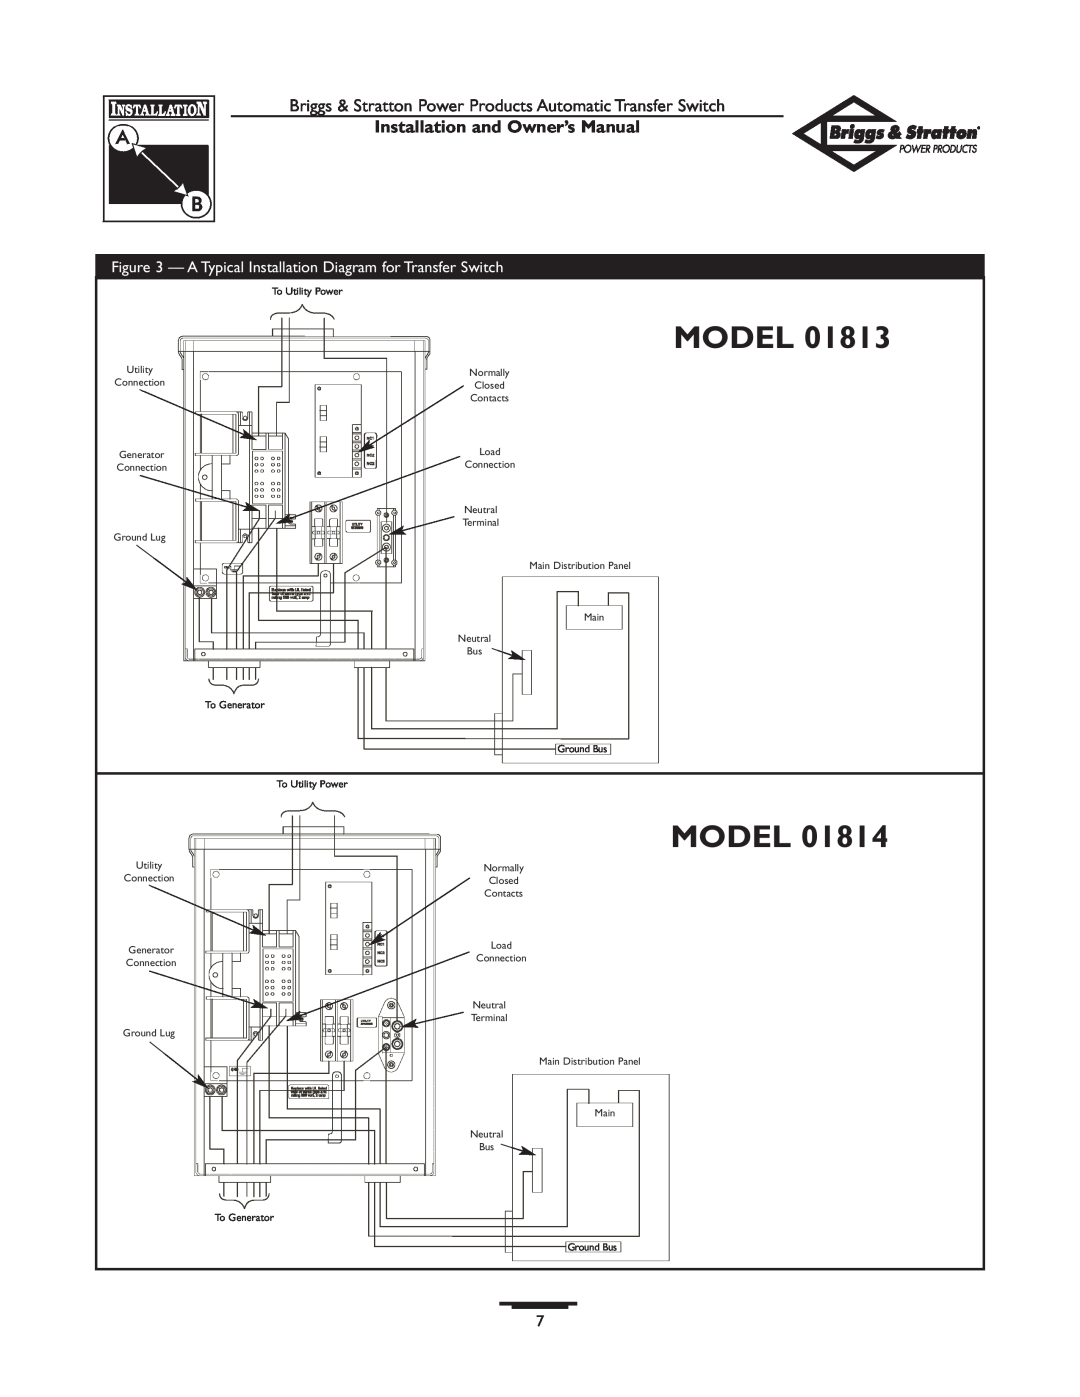 Briggs & Stratton 01813-0 Model, Installation and Owner’s Manual, A Typical Installation Diagram for Transfer Switch 